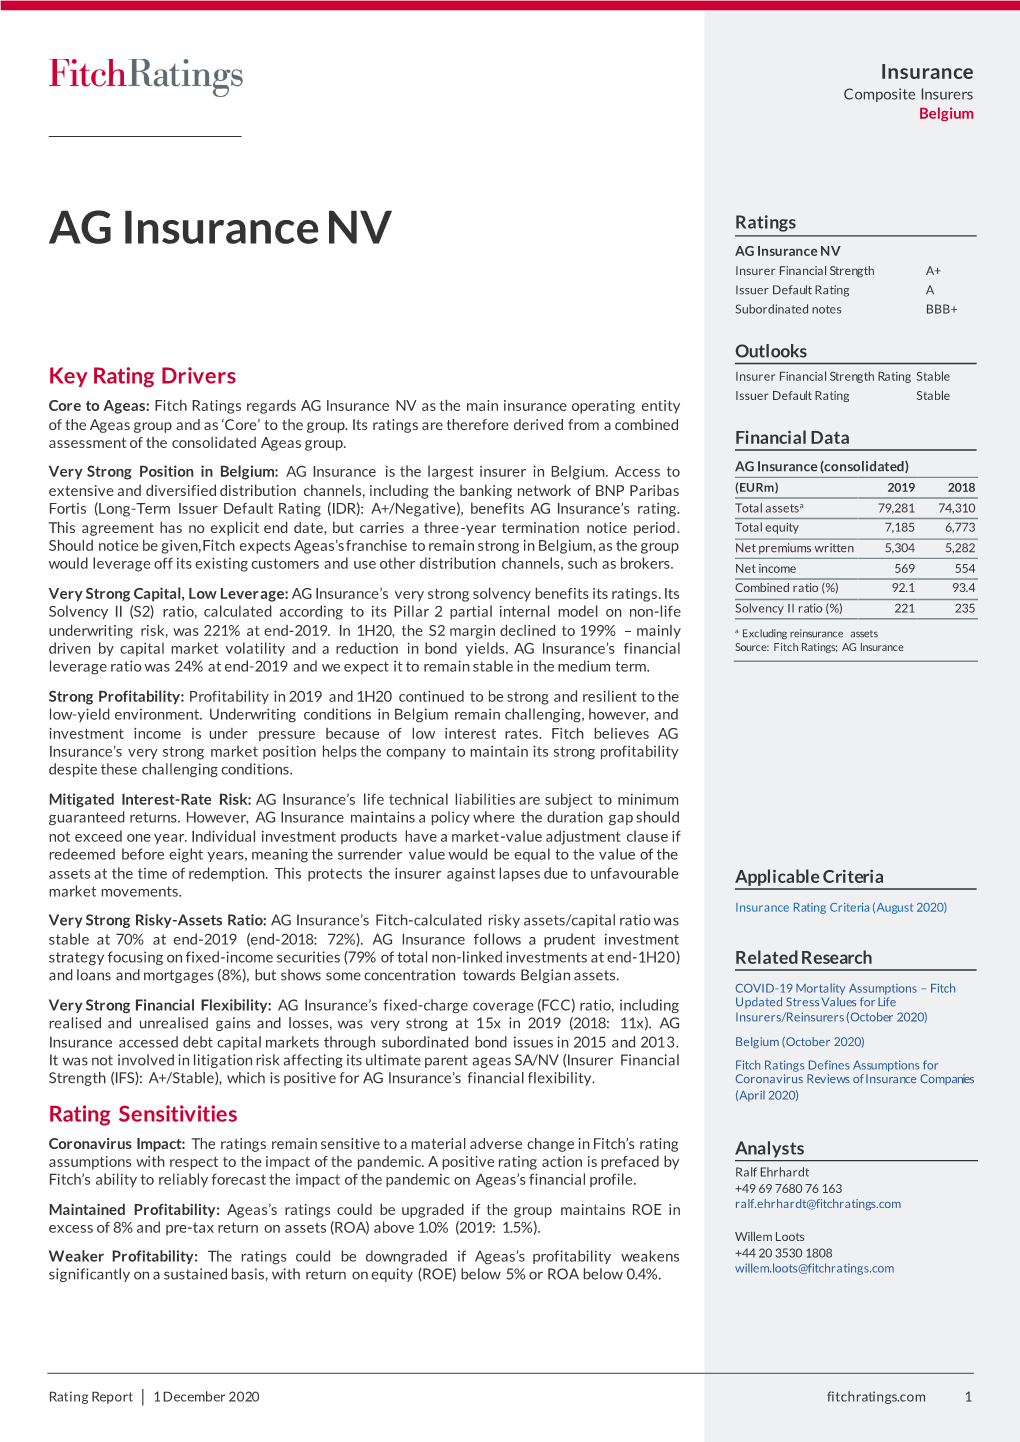 AG Insurance NV Ratings AG Insurance NV Insurer Financial Strength A+ Issuer Default Rating a Subordinated Notes BBB+